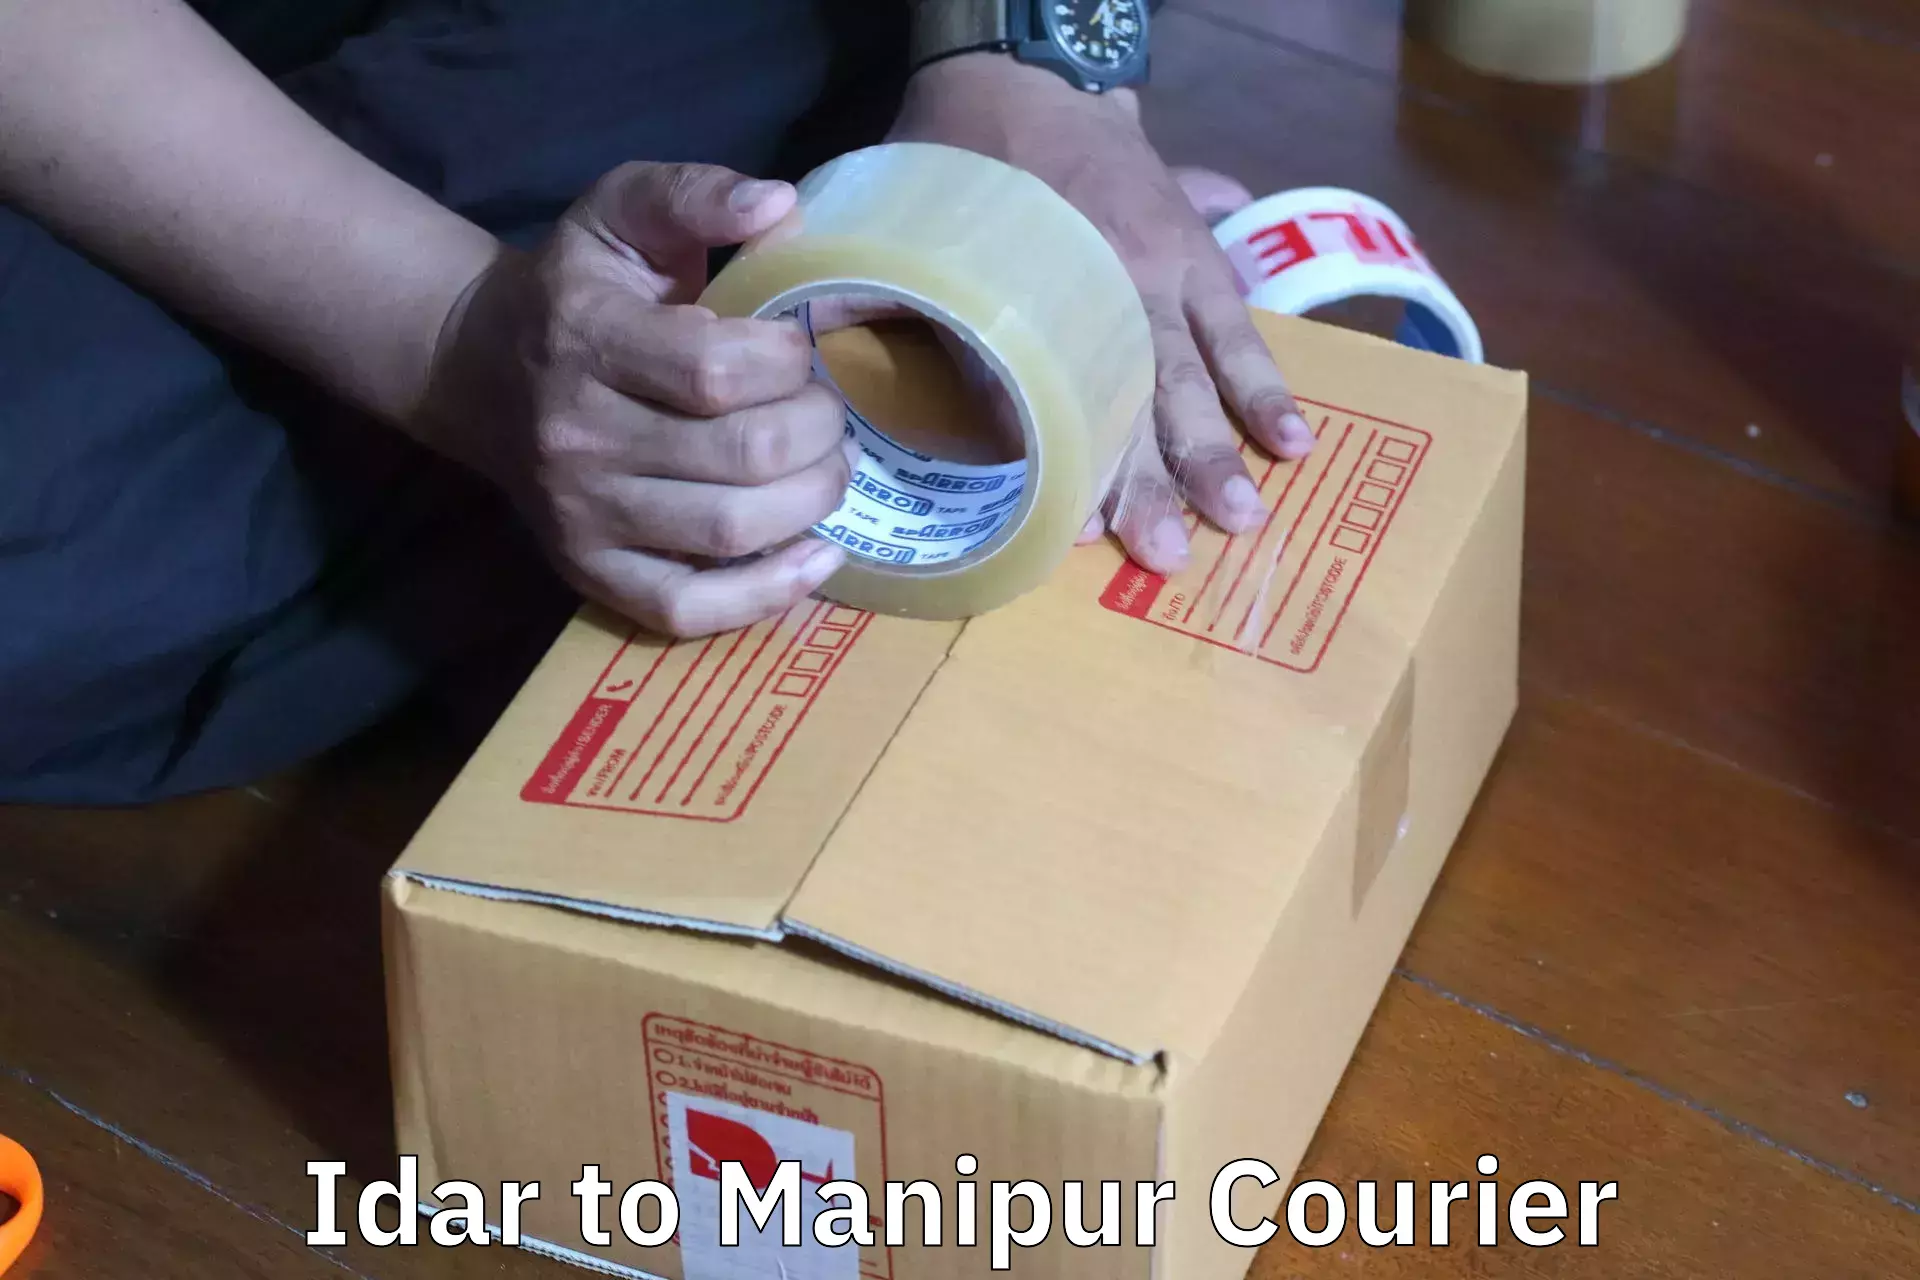 Reliable movers in Idar to Manipur